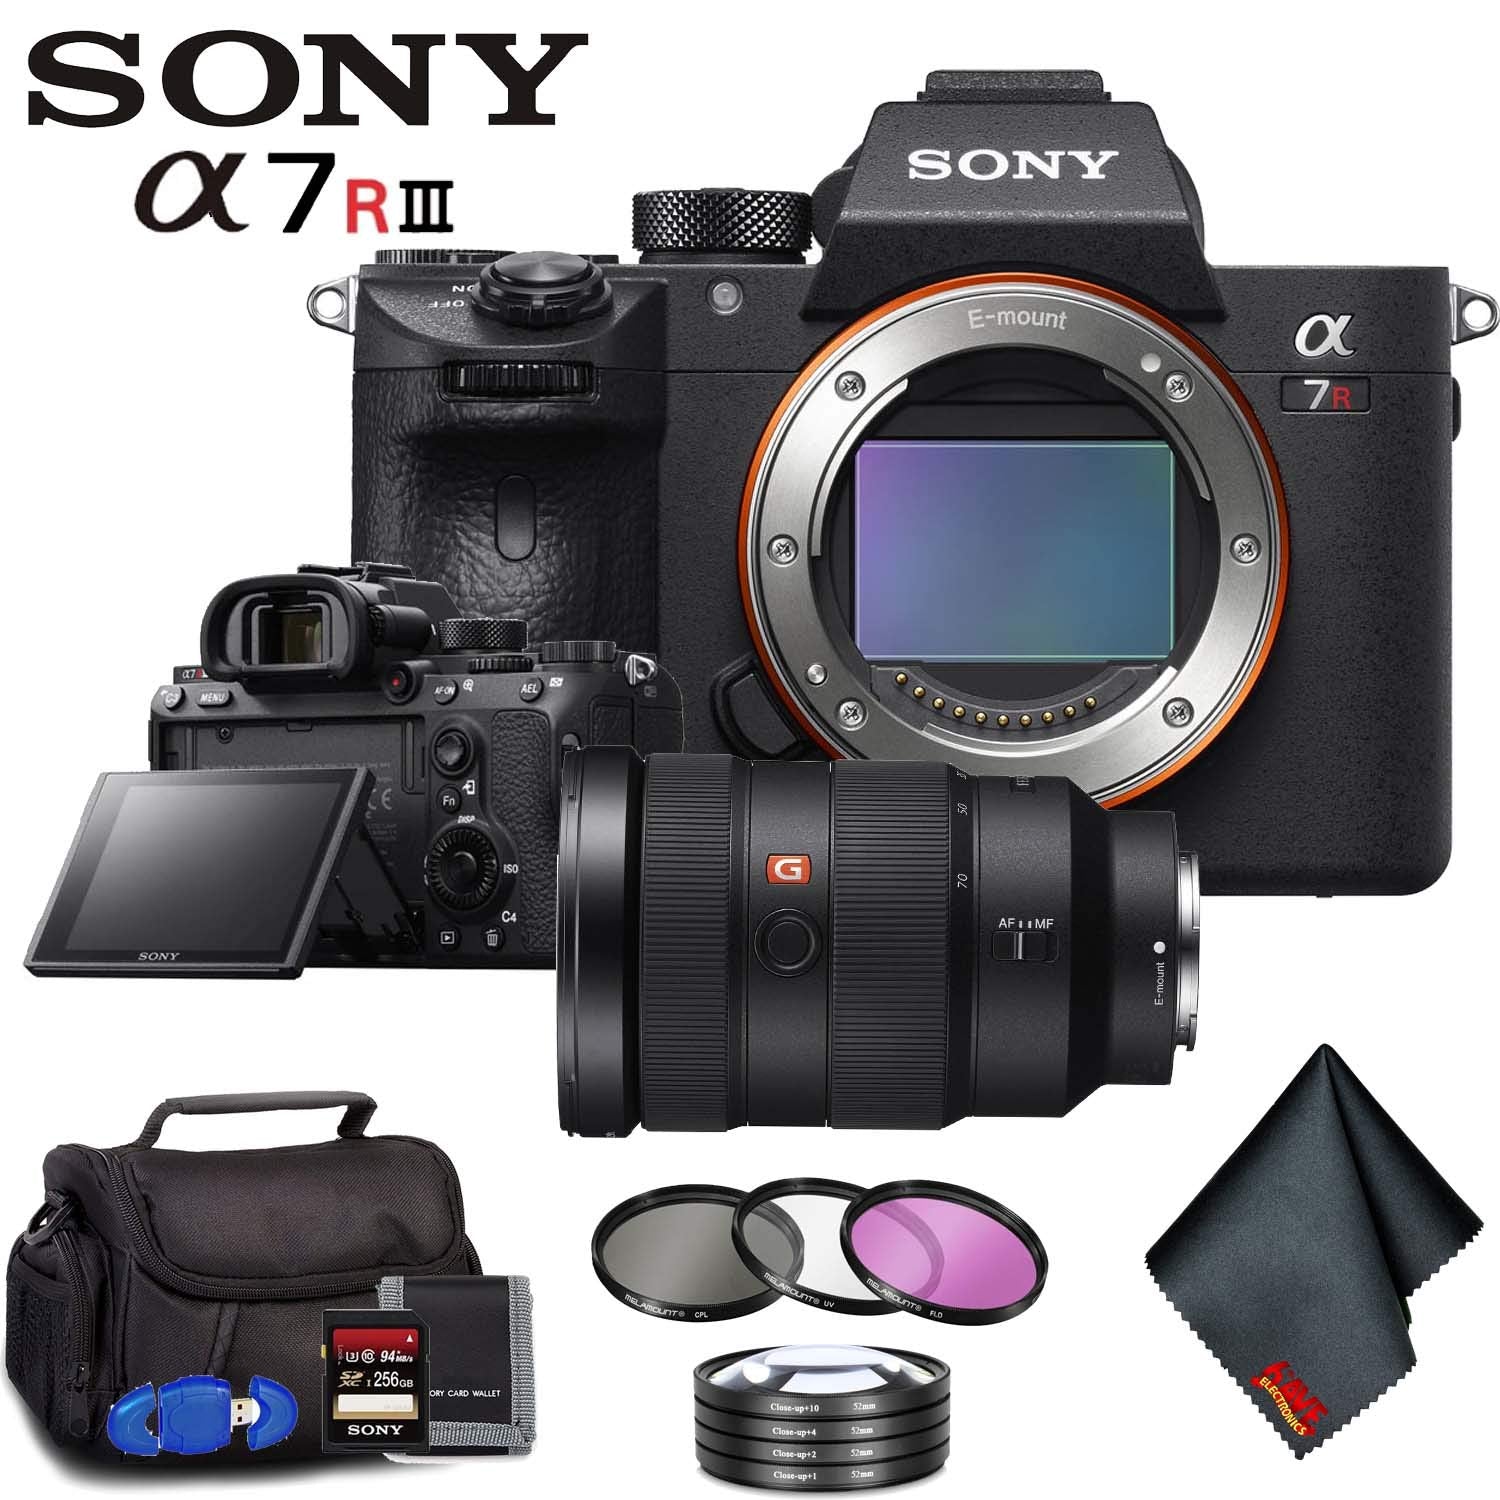 Sony Alpha a7R III Mirrorless Digital Camera (Body Only) + 24-70mm Lens + Filter Kit + Memory Card Kit + Carrying Case Advanced Bundle